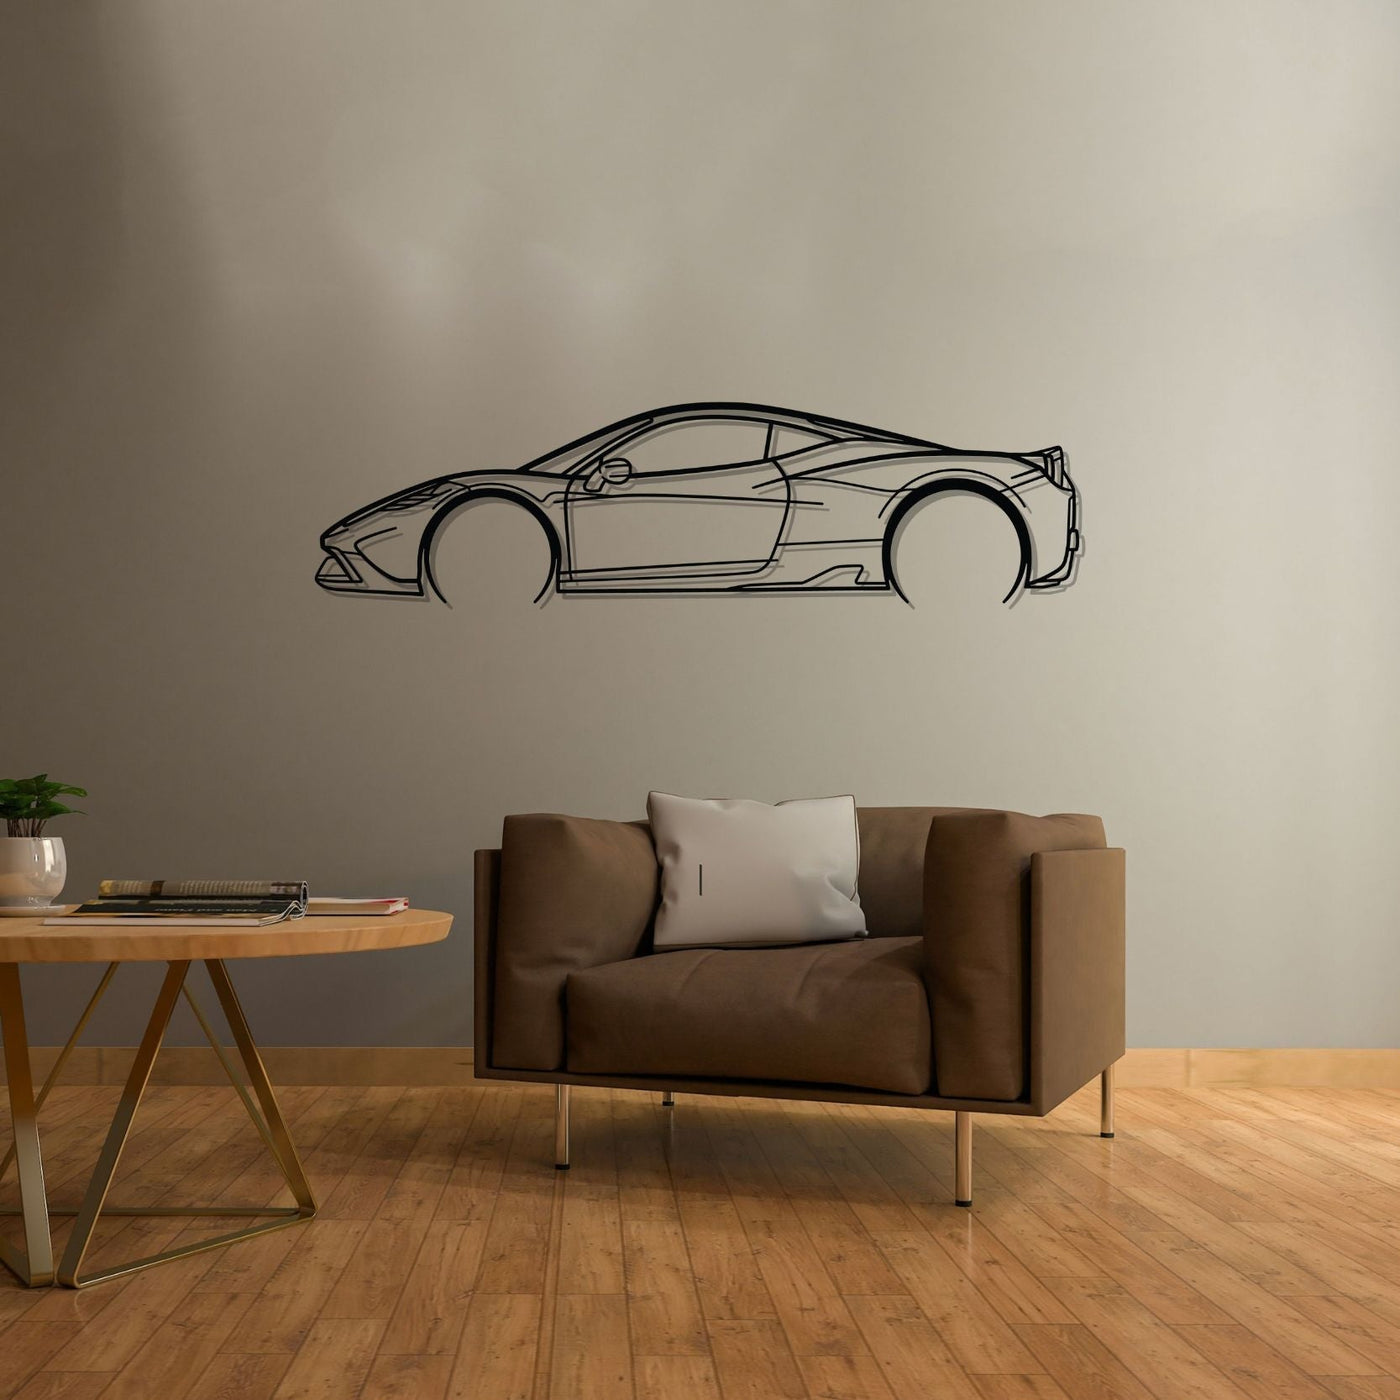 458 Speciale Detailed Silhouette Metal Wall Art